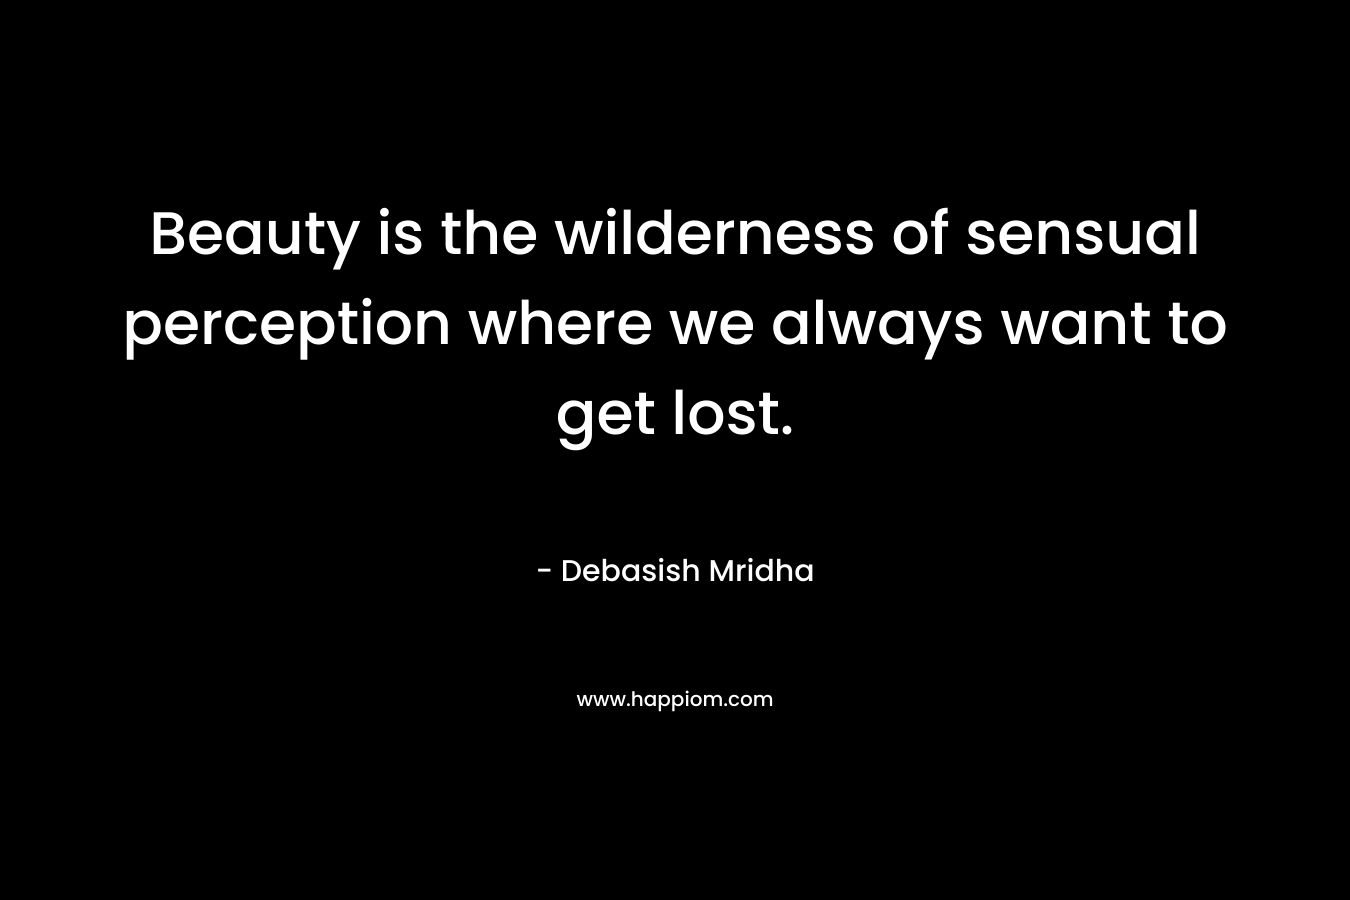 Beauty is the wilderness of sensual perception where we always want to get lost.